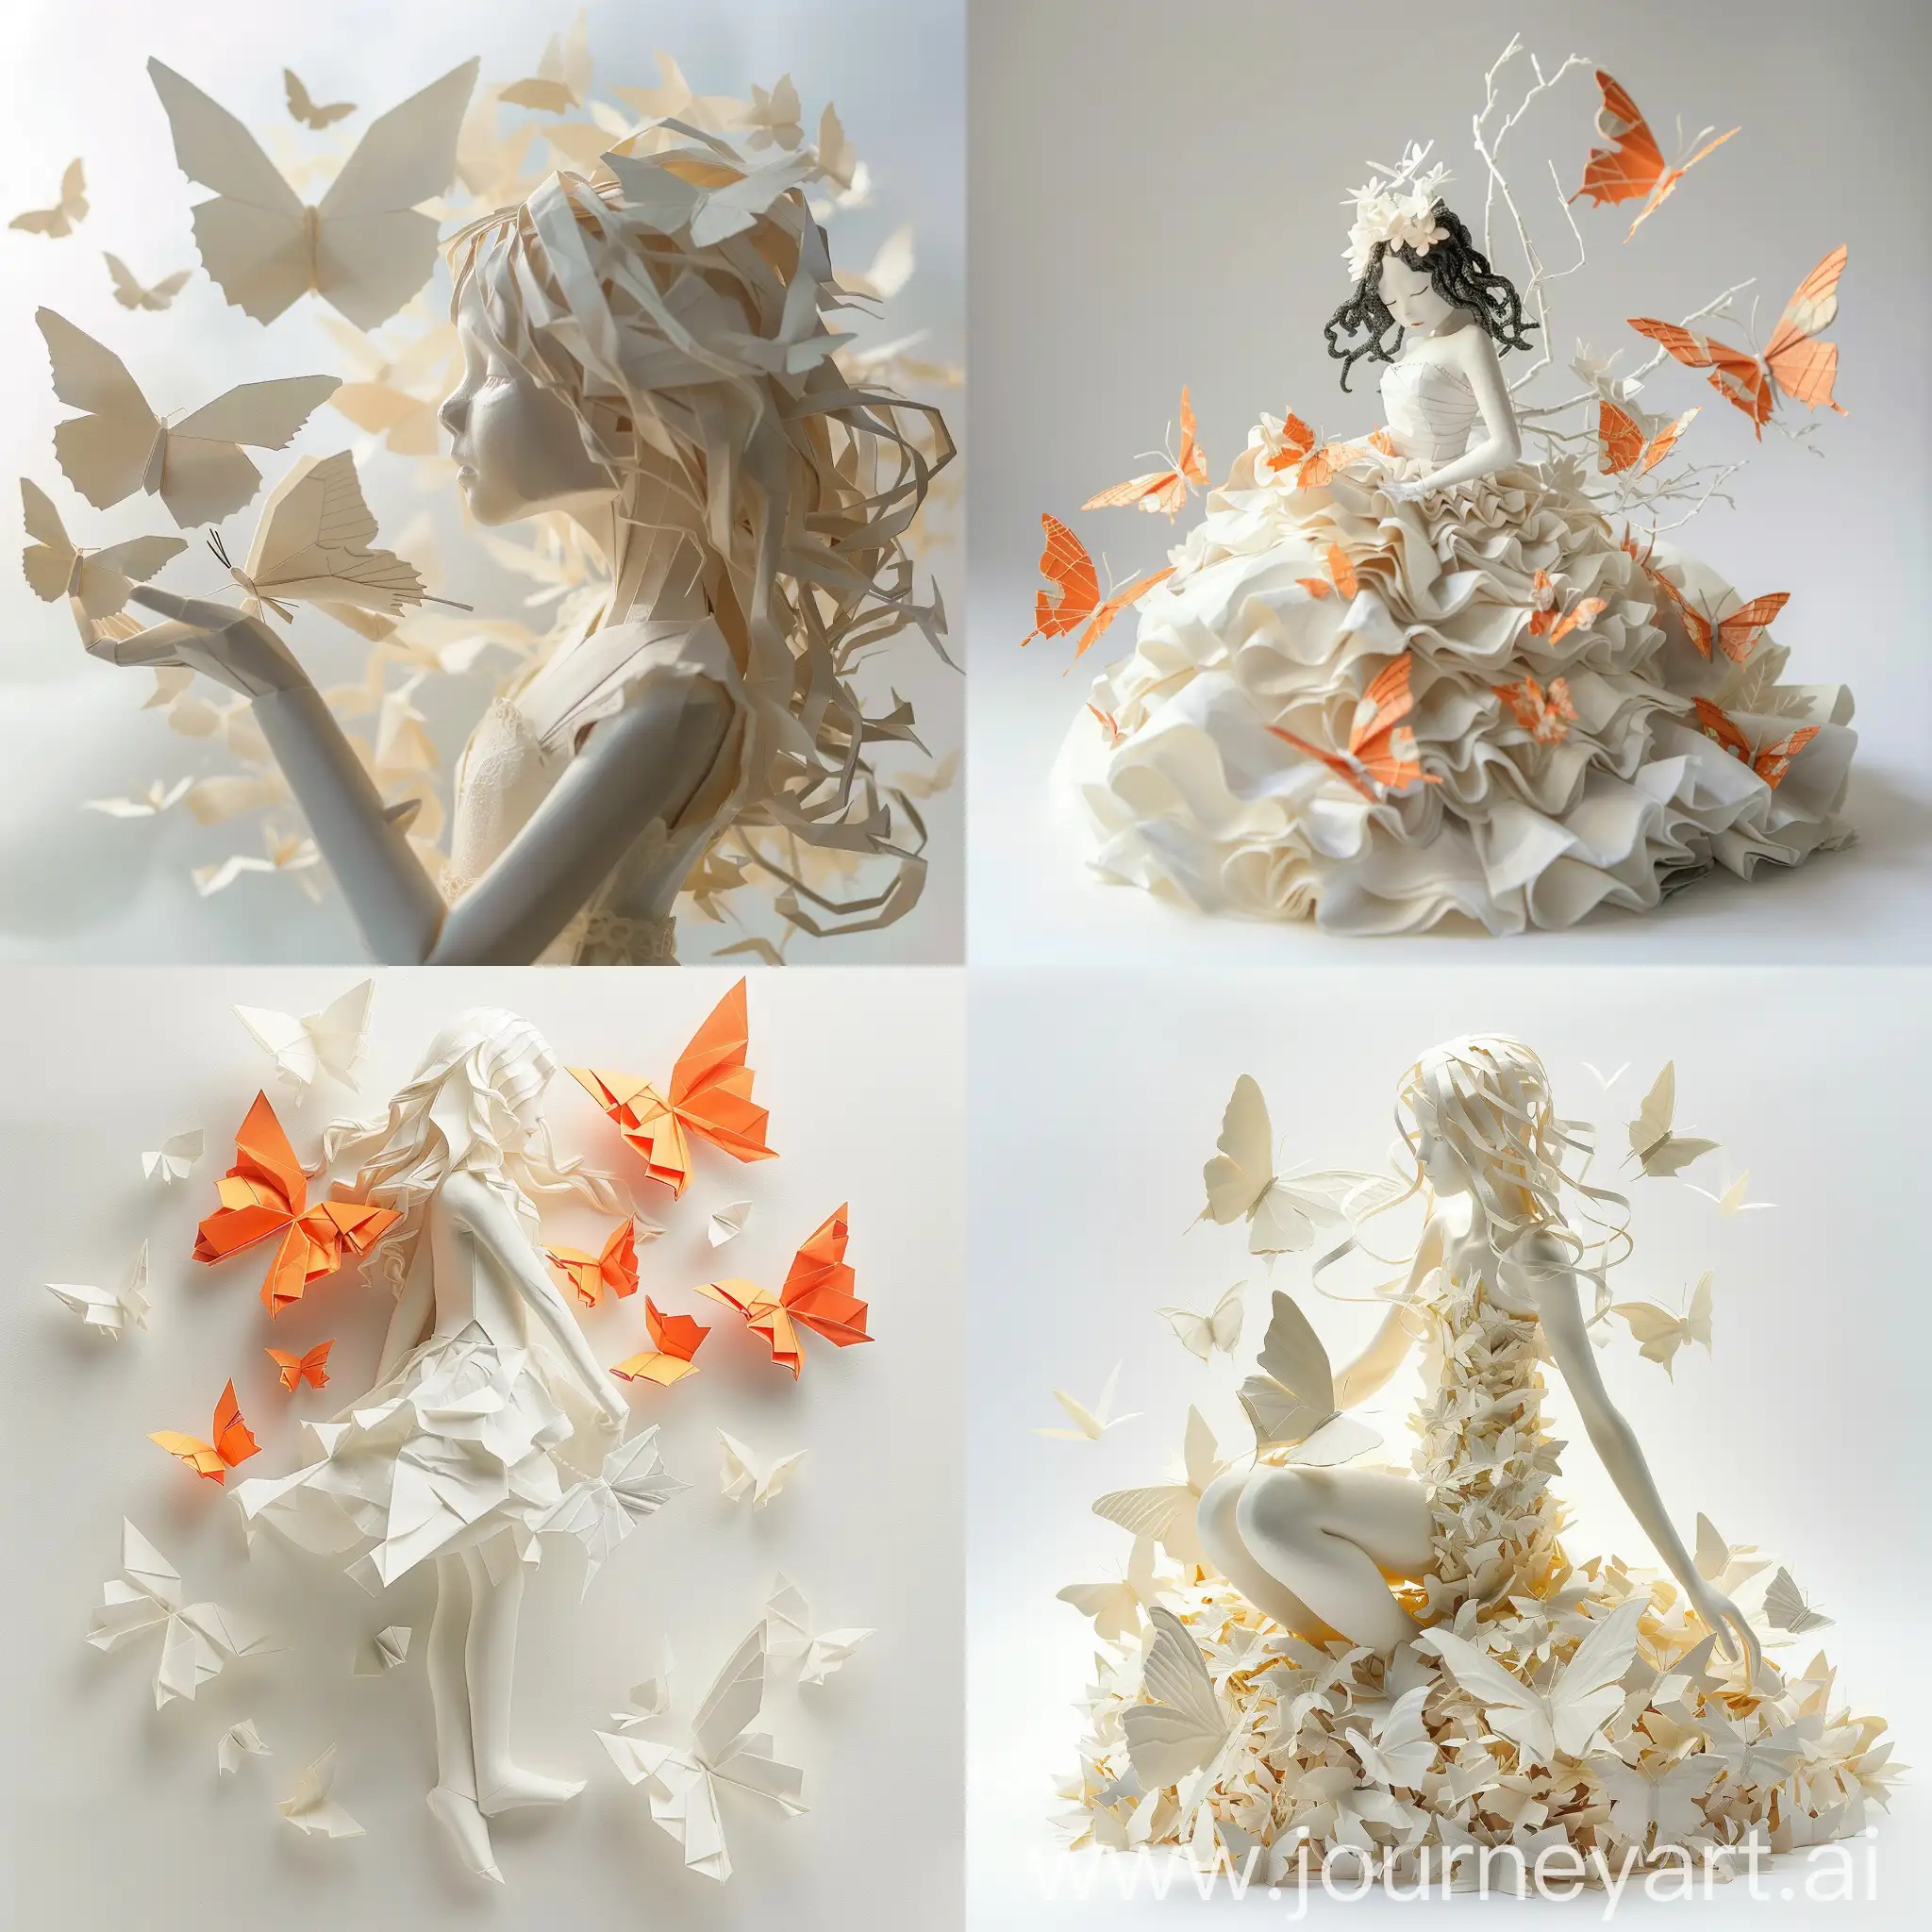 This series, "Girl and Butterfly," showcases the dreamlike interplay between girls and butterflies through origami sculptures, conveying symbols of innocence, transformation, and beauty.

Butterflies represent rebirth and the transcendence of the soul, girls symbolize purity and hope, while paper signifies the continuation of knowledge, art, and culture. Through exquisite origami techniques, the artist merges these elements to create serene and poetic scenes, evoking a deep contemplation of the fragility and beauty of life in the viewer.